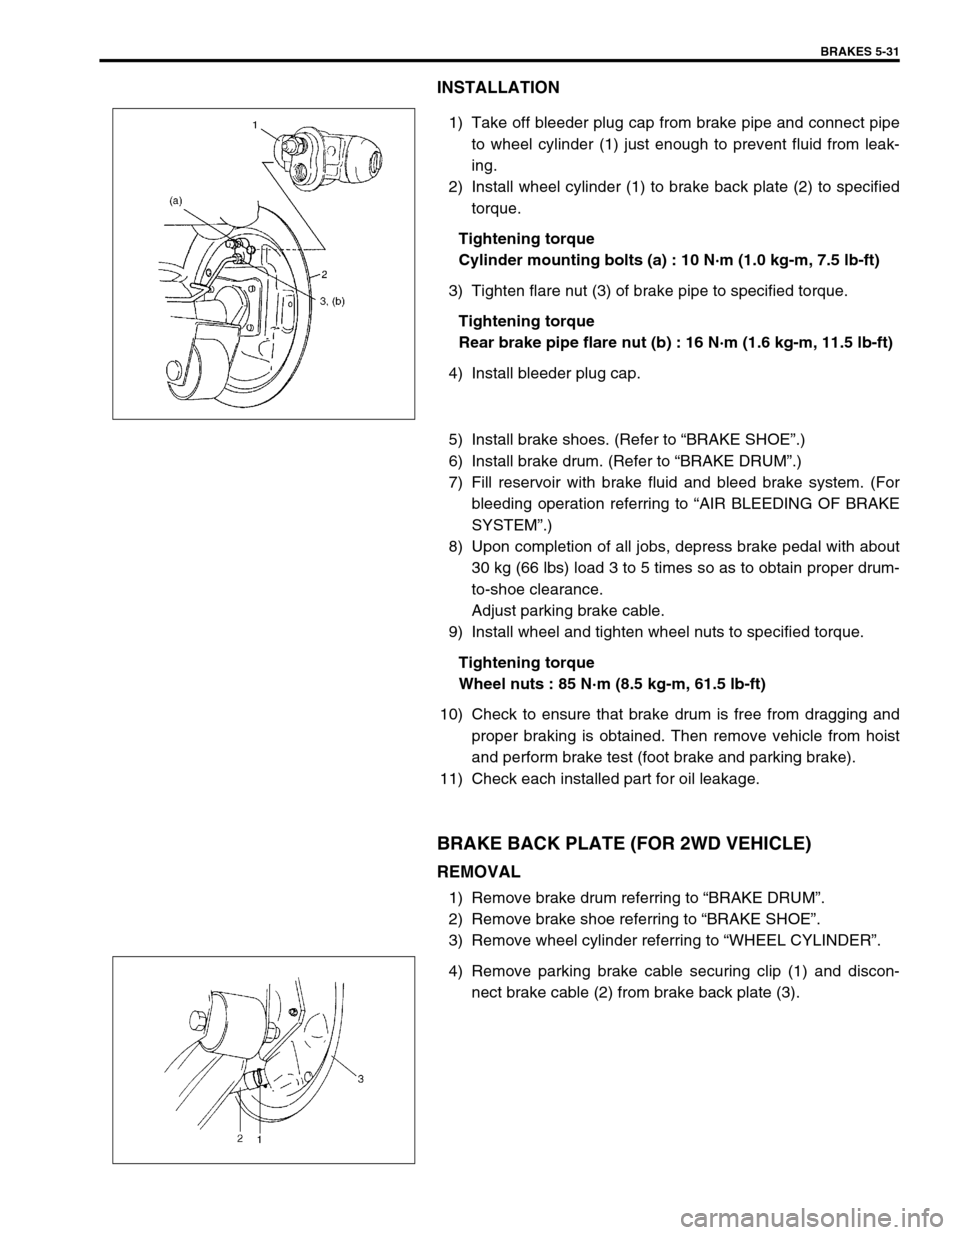 SUZUKI SWIFT 2000 1.G RG413 Service Owners Manual BRAKES 5-31
INSTALLATION
1) Take off bleeder plug cap from brake pipe and connect pipe
to wheel cylinder (1) just enough to prevent fluid from leak-
ing.
2) Install wheel cylinder (1) to brake back pl